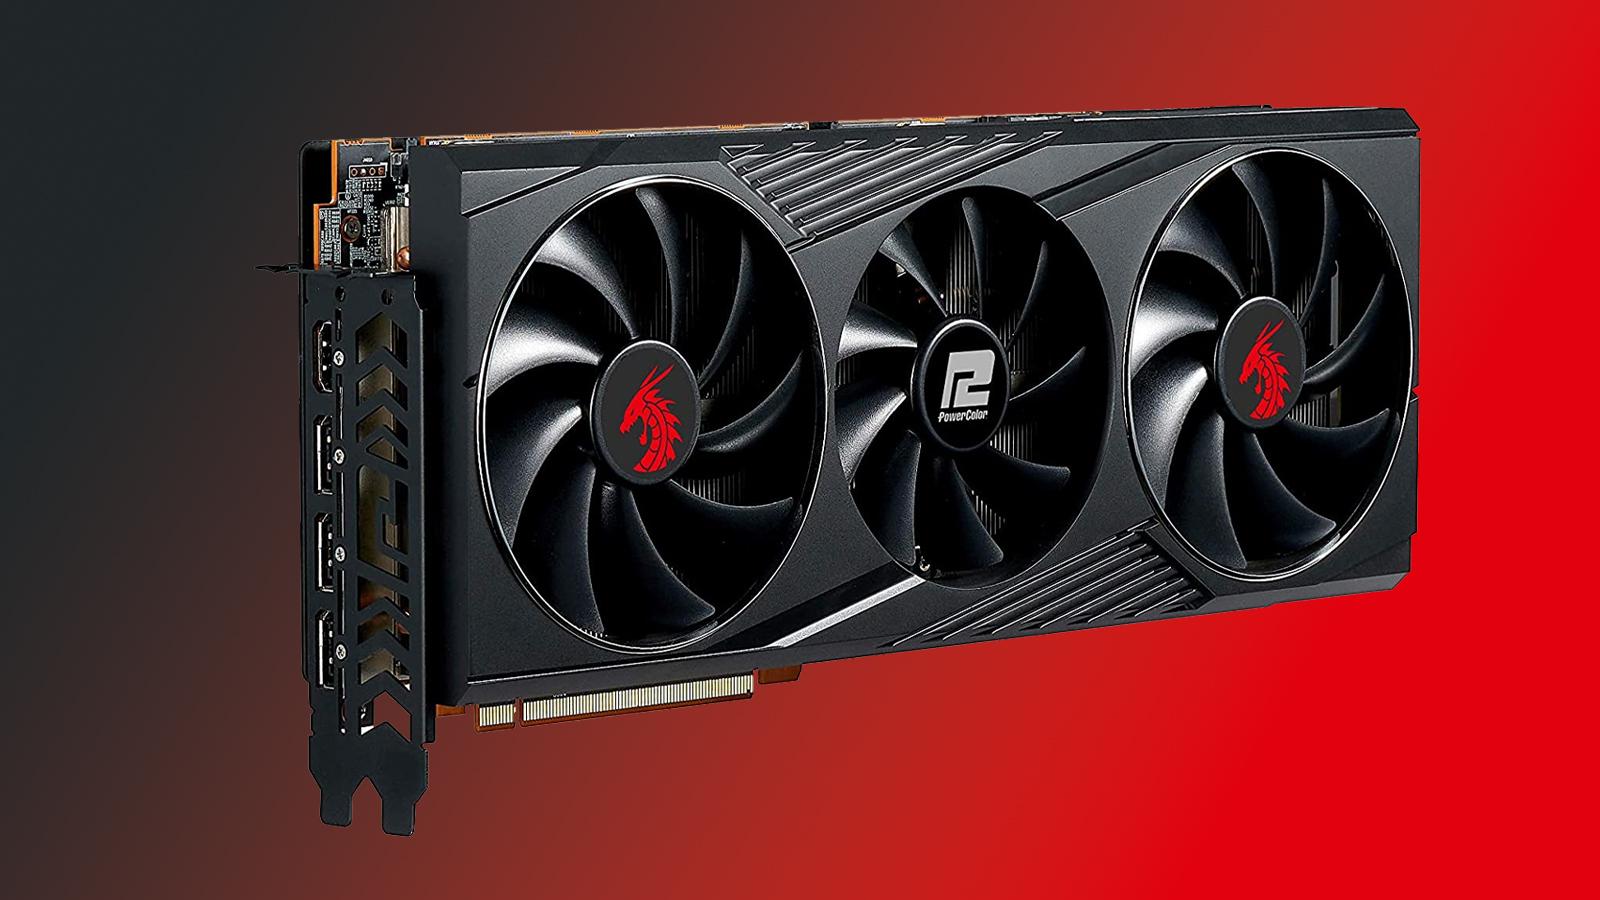 AMD Adds Radeon RX 7600 XT To Product Stack, 1080p Gaming Card